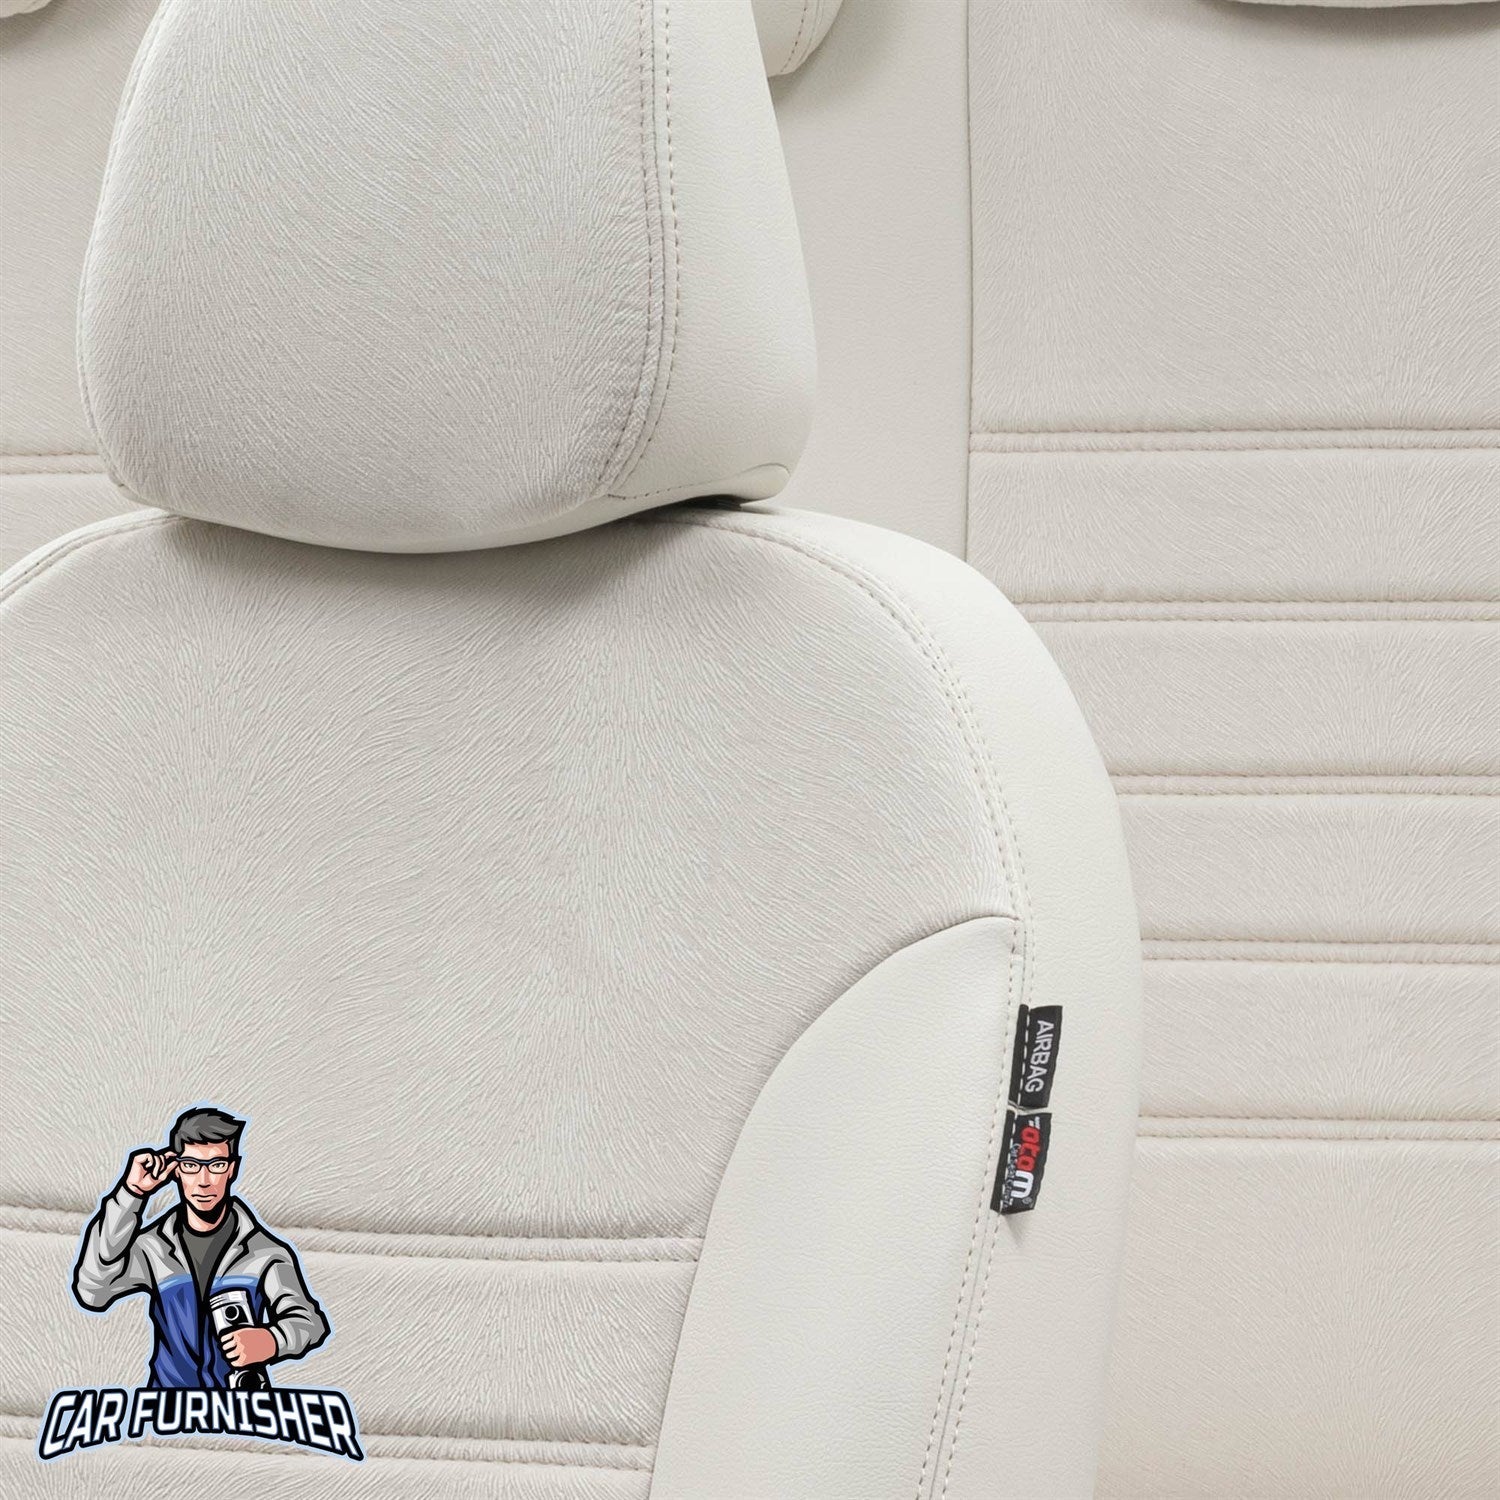 Chevrolet Aveo Car Seat Cover 2003-2023 T200/T250/T300 London Ivory Full Set (5 Seats + Handrest) Leather & Fabric